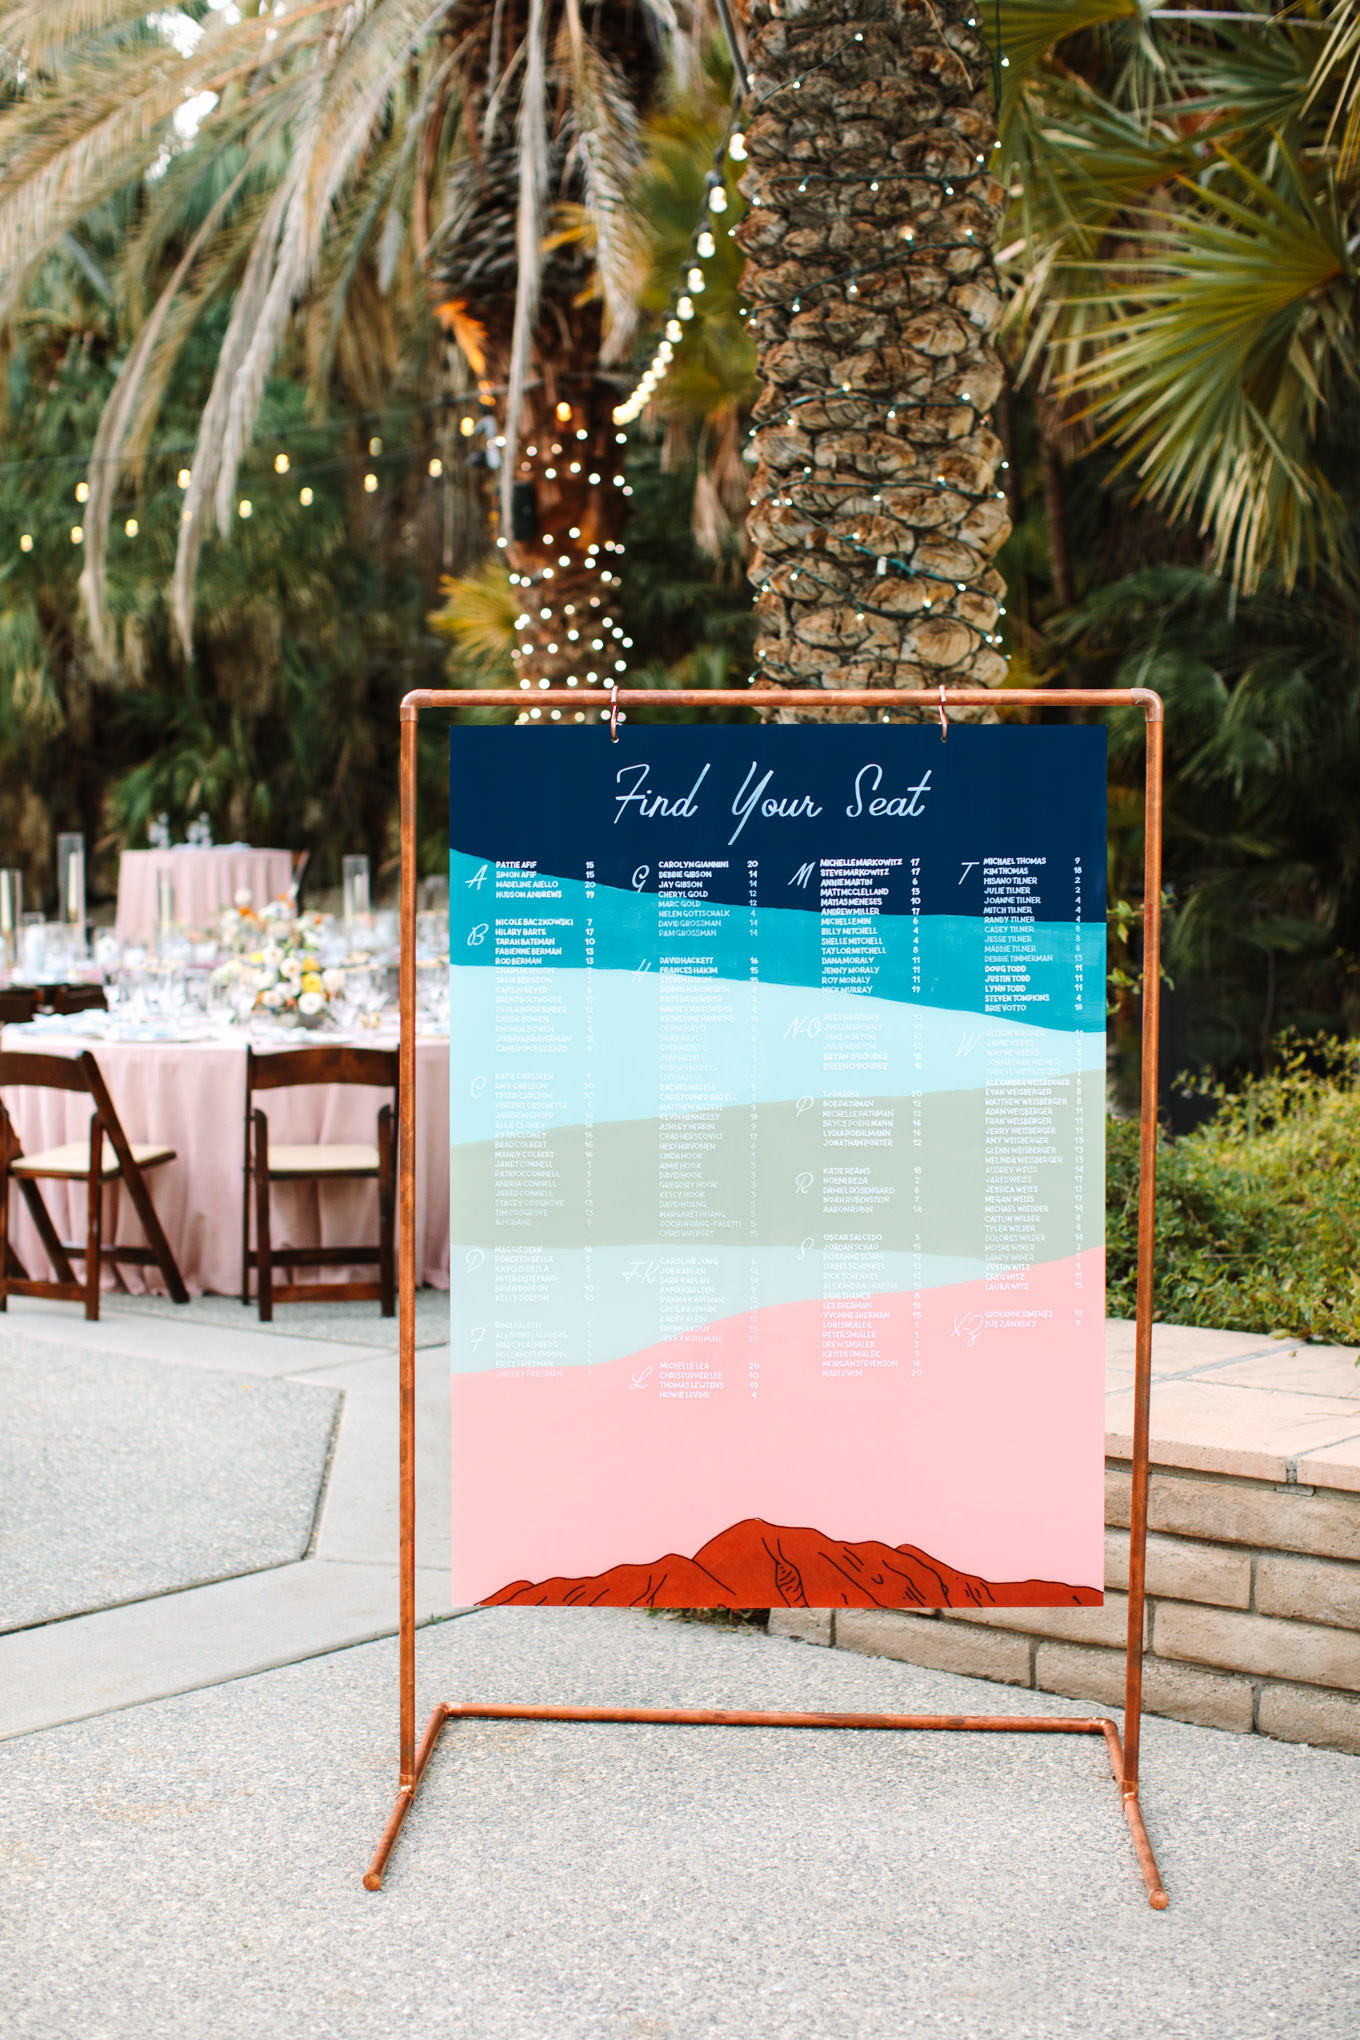 Custom acrylic seating chart | Living Desert Zoo & Gardens wedding with unique details | Elevated and colorful wedding photography for fun-loving couples in Southern California |  #PalmSprings #palmspringsphotographer #gardenwedding #palmspringswedding  Source: Mary Costa Photography | Los Angeles wedding photographer 